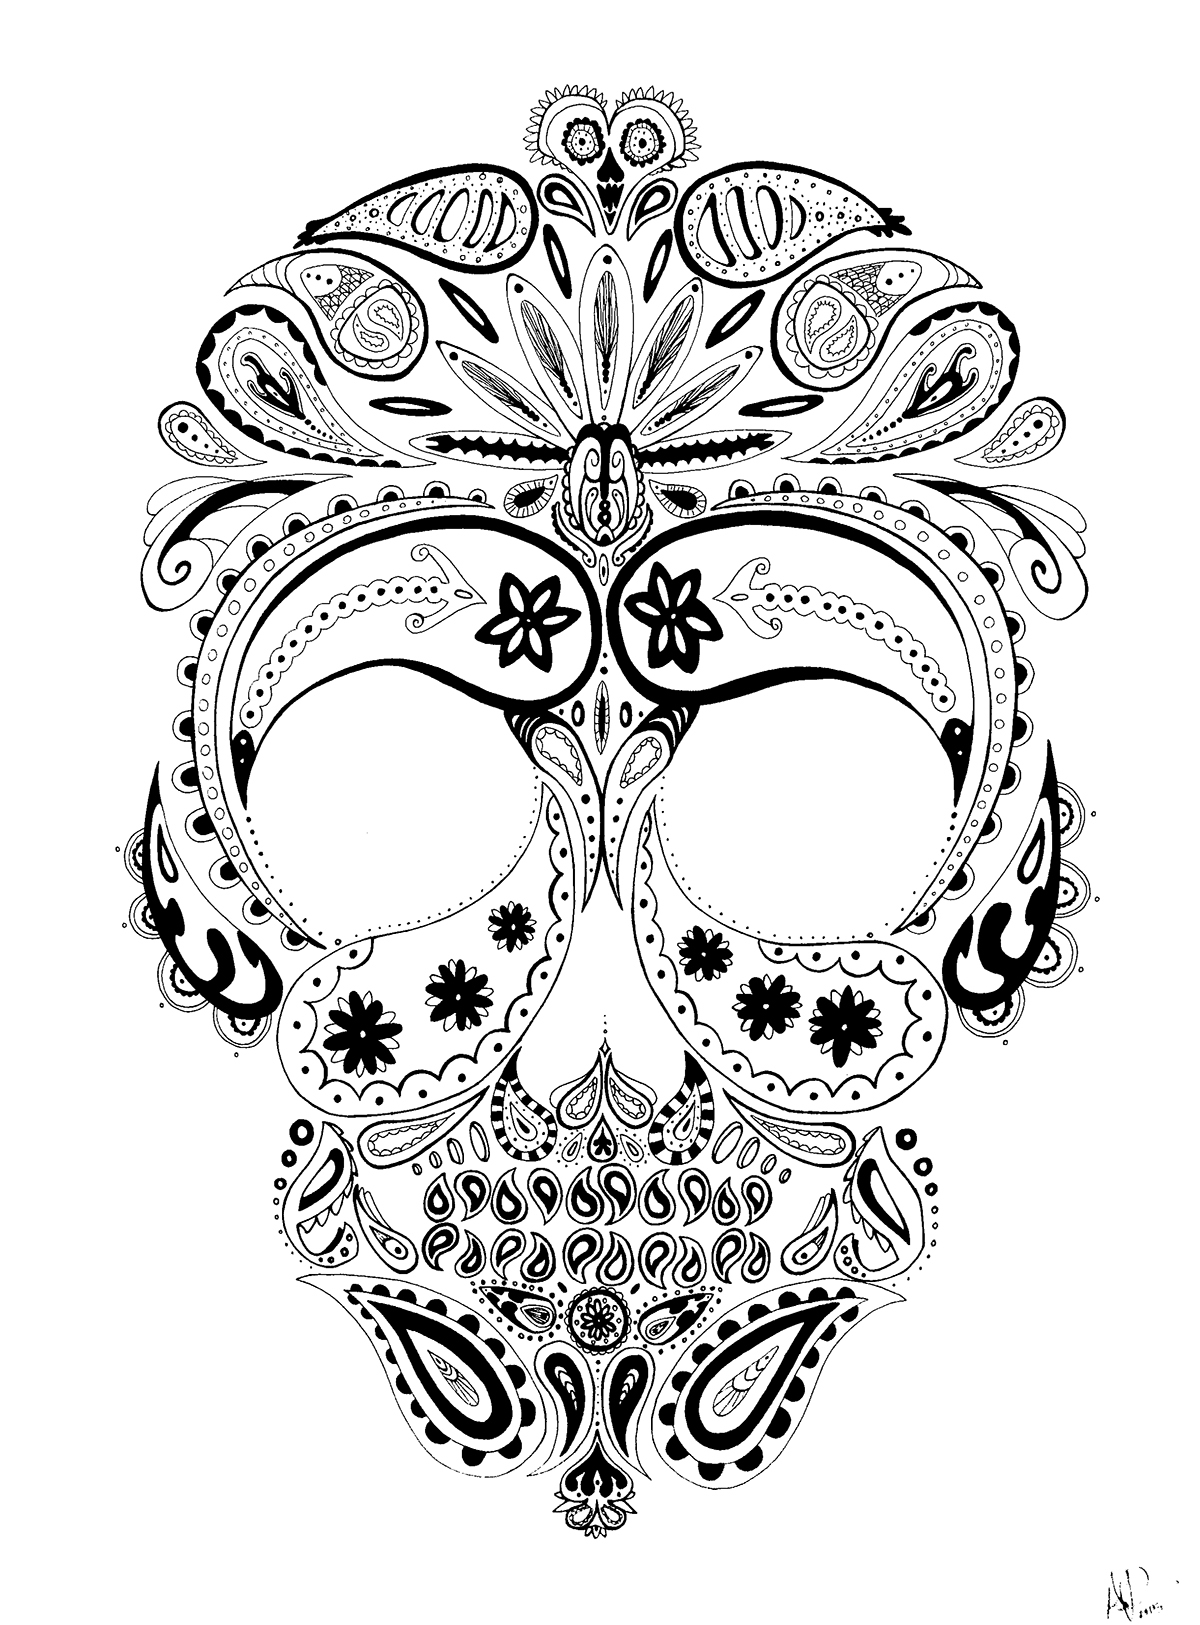 ink Bristol paisley skull black and white High Contrast freehand #madethis  #Colossal